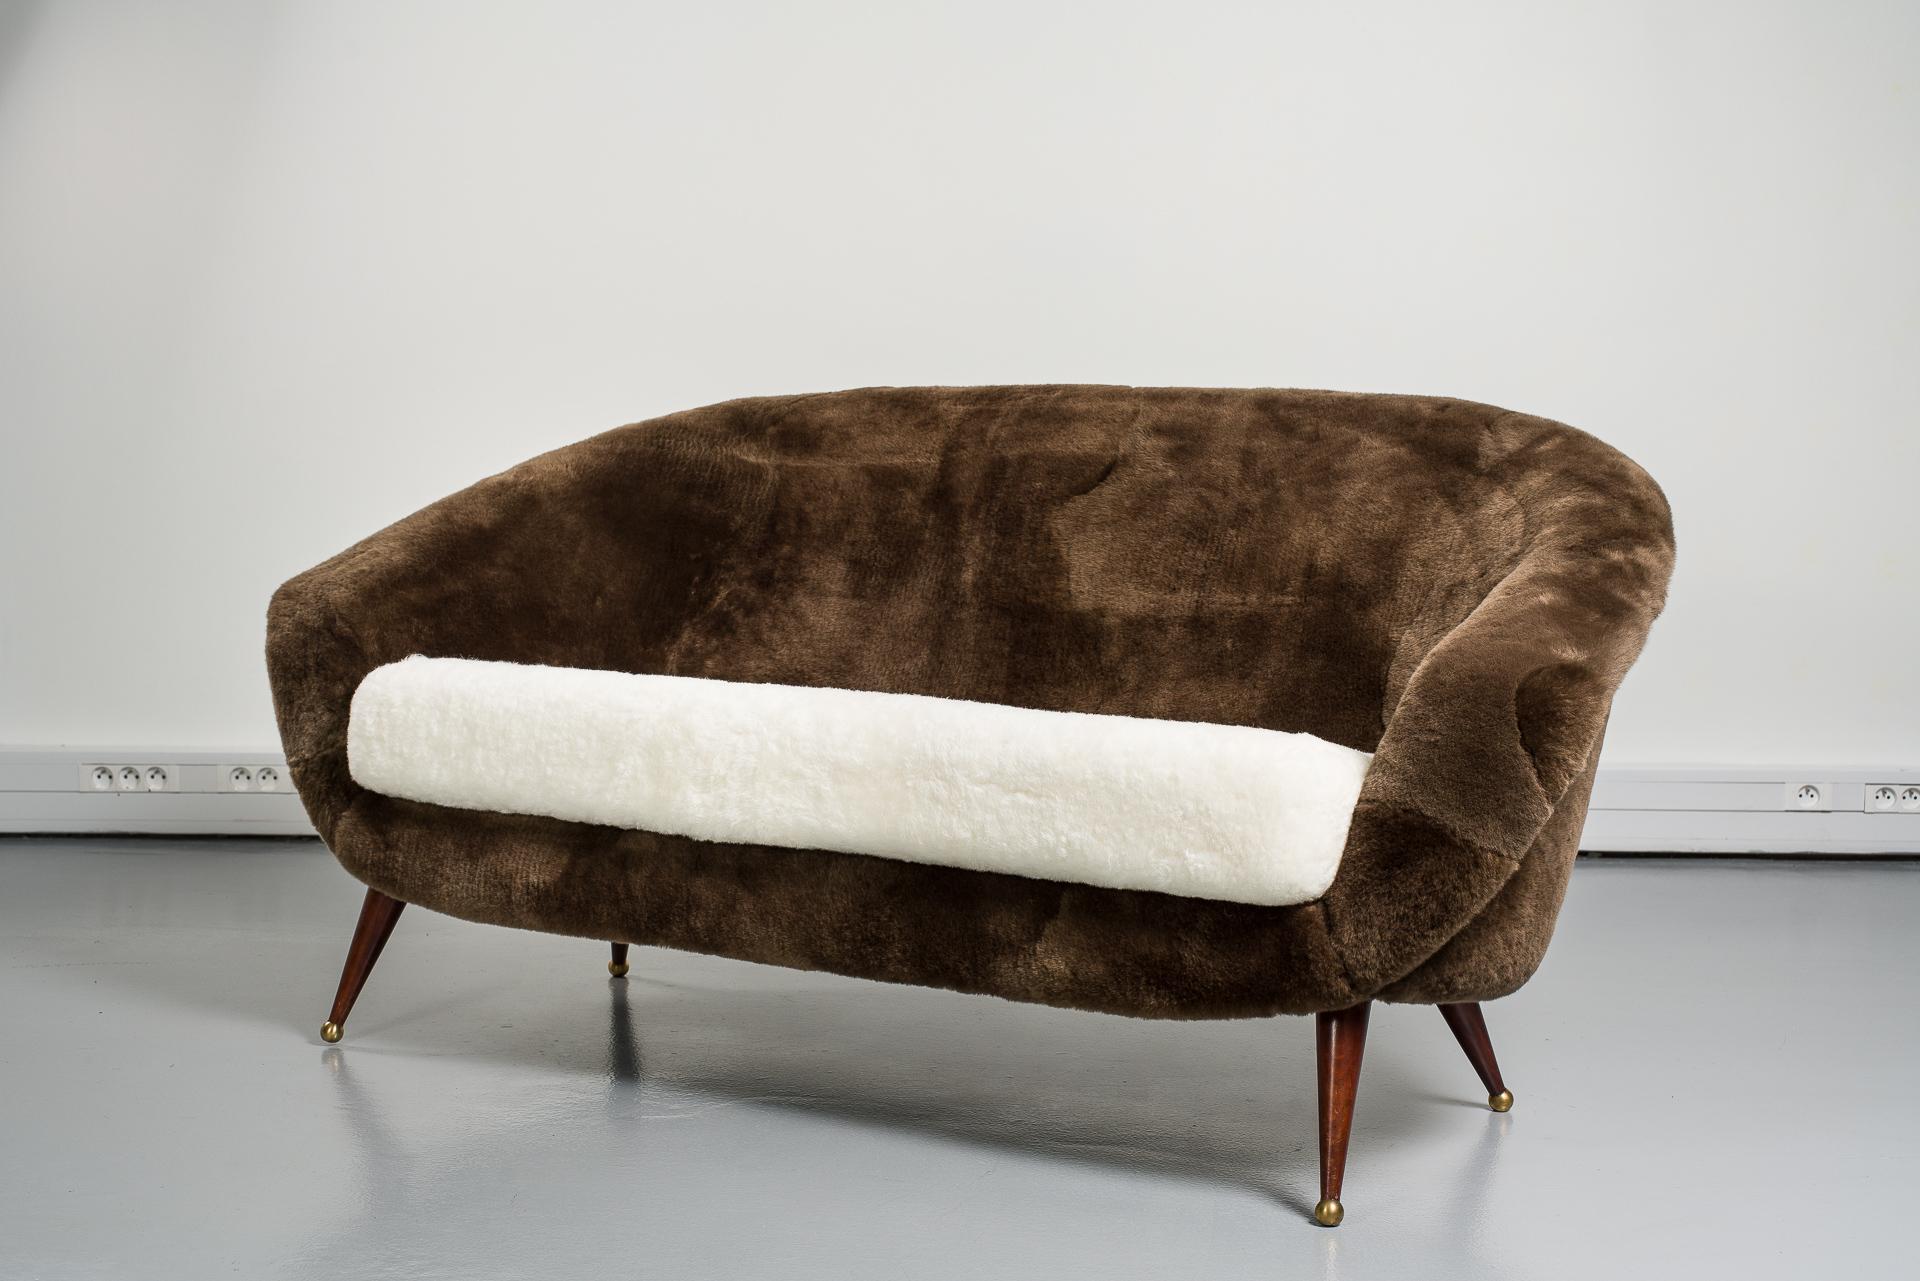 Scandinavian vintage sofa model Tellus by Folke Jansson for SM Wincrantz Mobelindustri AB Skövde 1955.
Newly reupholstered in with shearling for the seating and brown shearling.
Teak legs with original brass details.